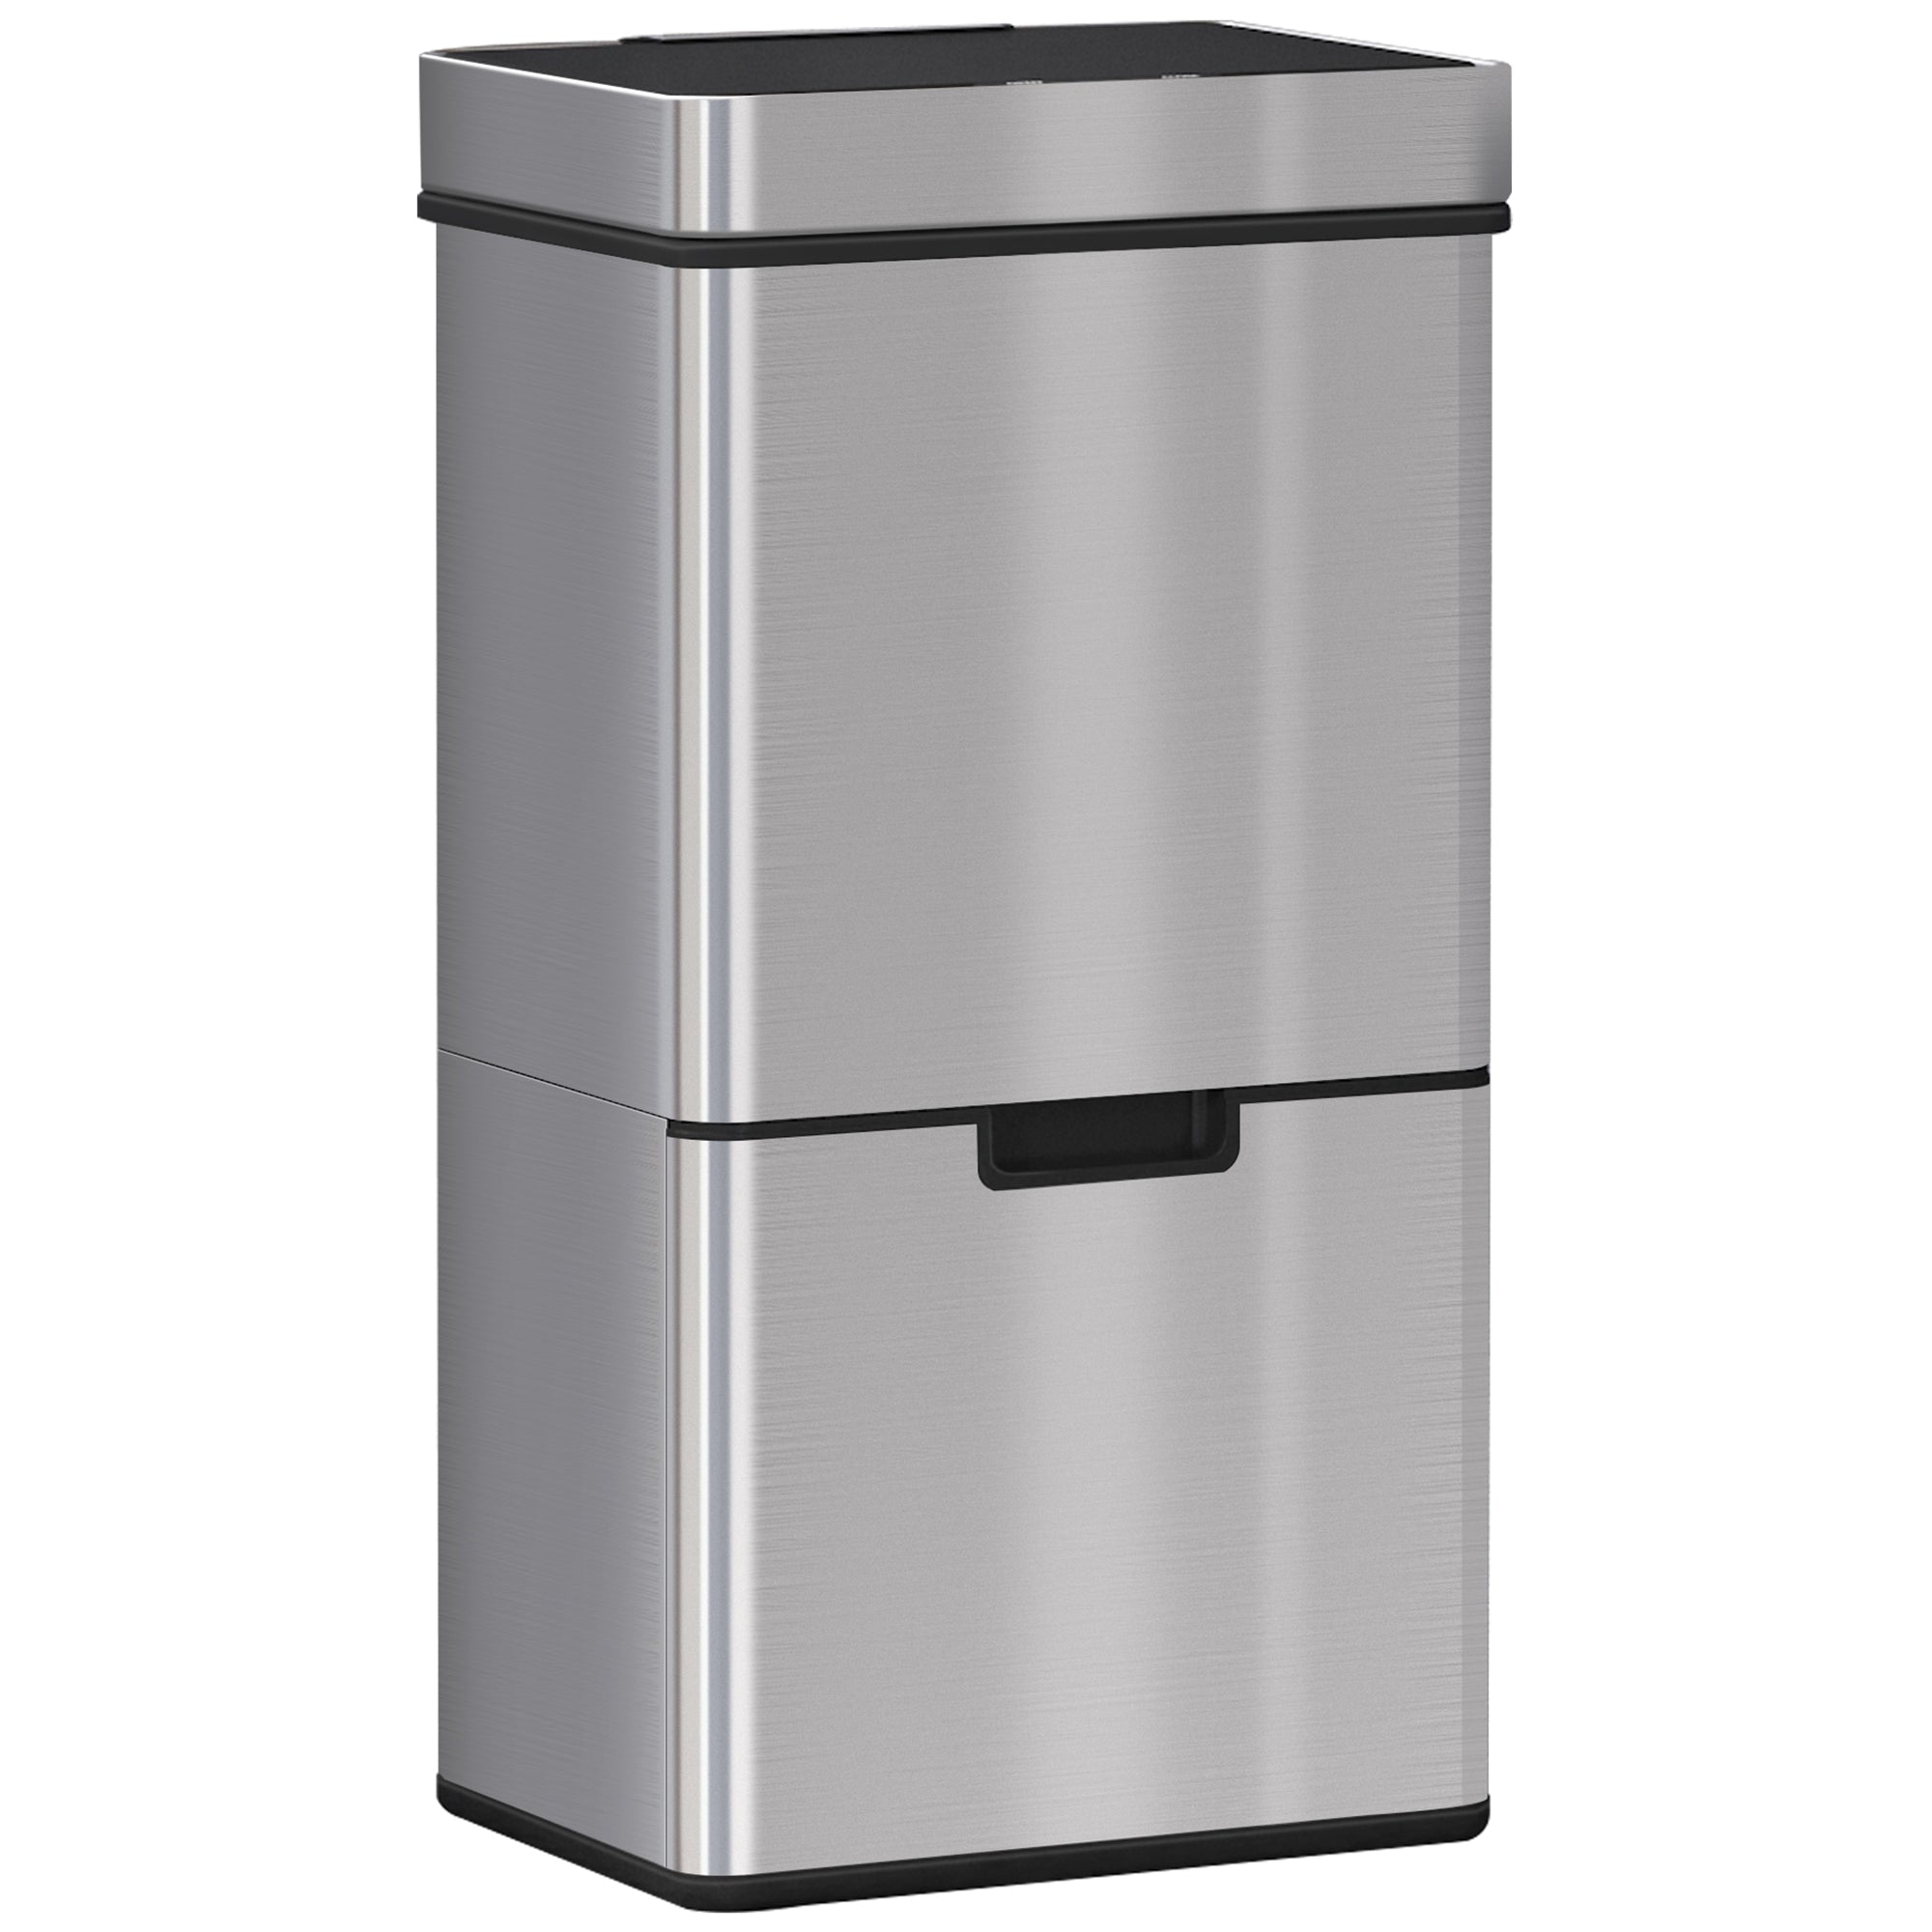 HOMCOM 72L Recycling Sensor Bin, Stainless Steel 3 Compartments for Both Wet or Dry Waste with Removable Lid Kitchen Home - TovaHaus